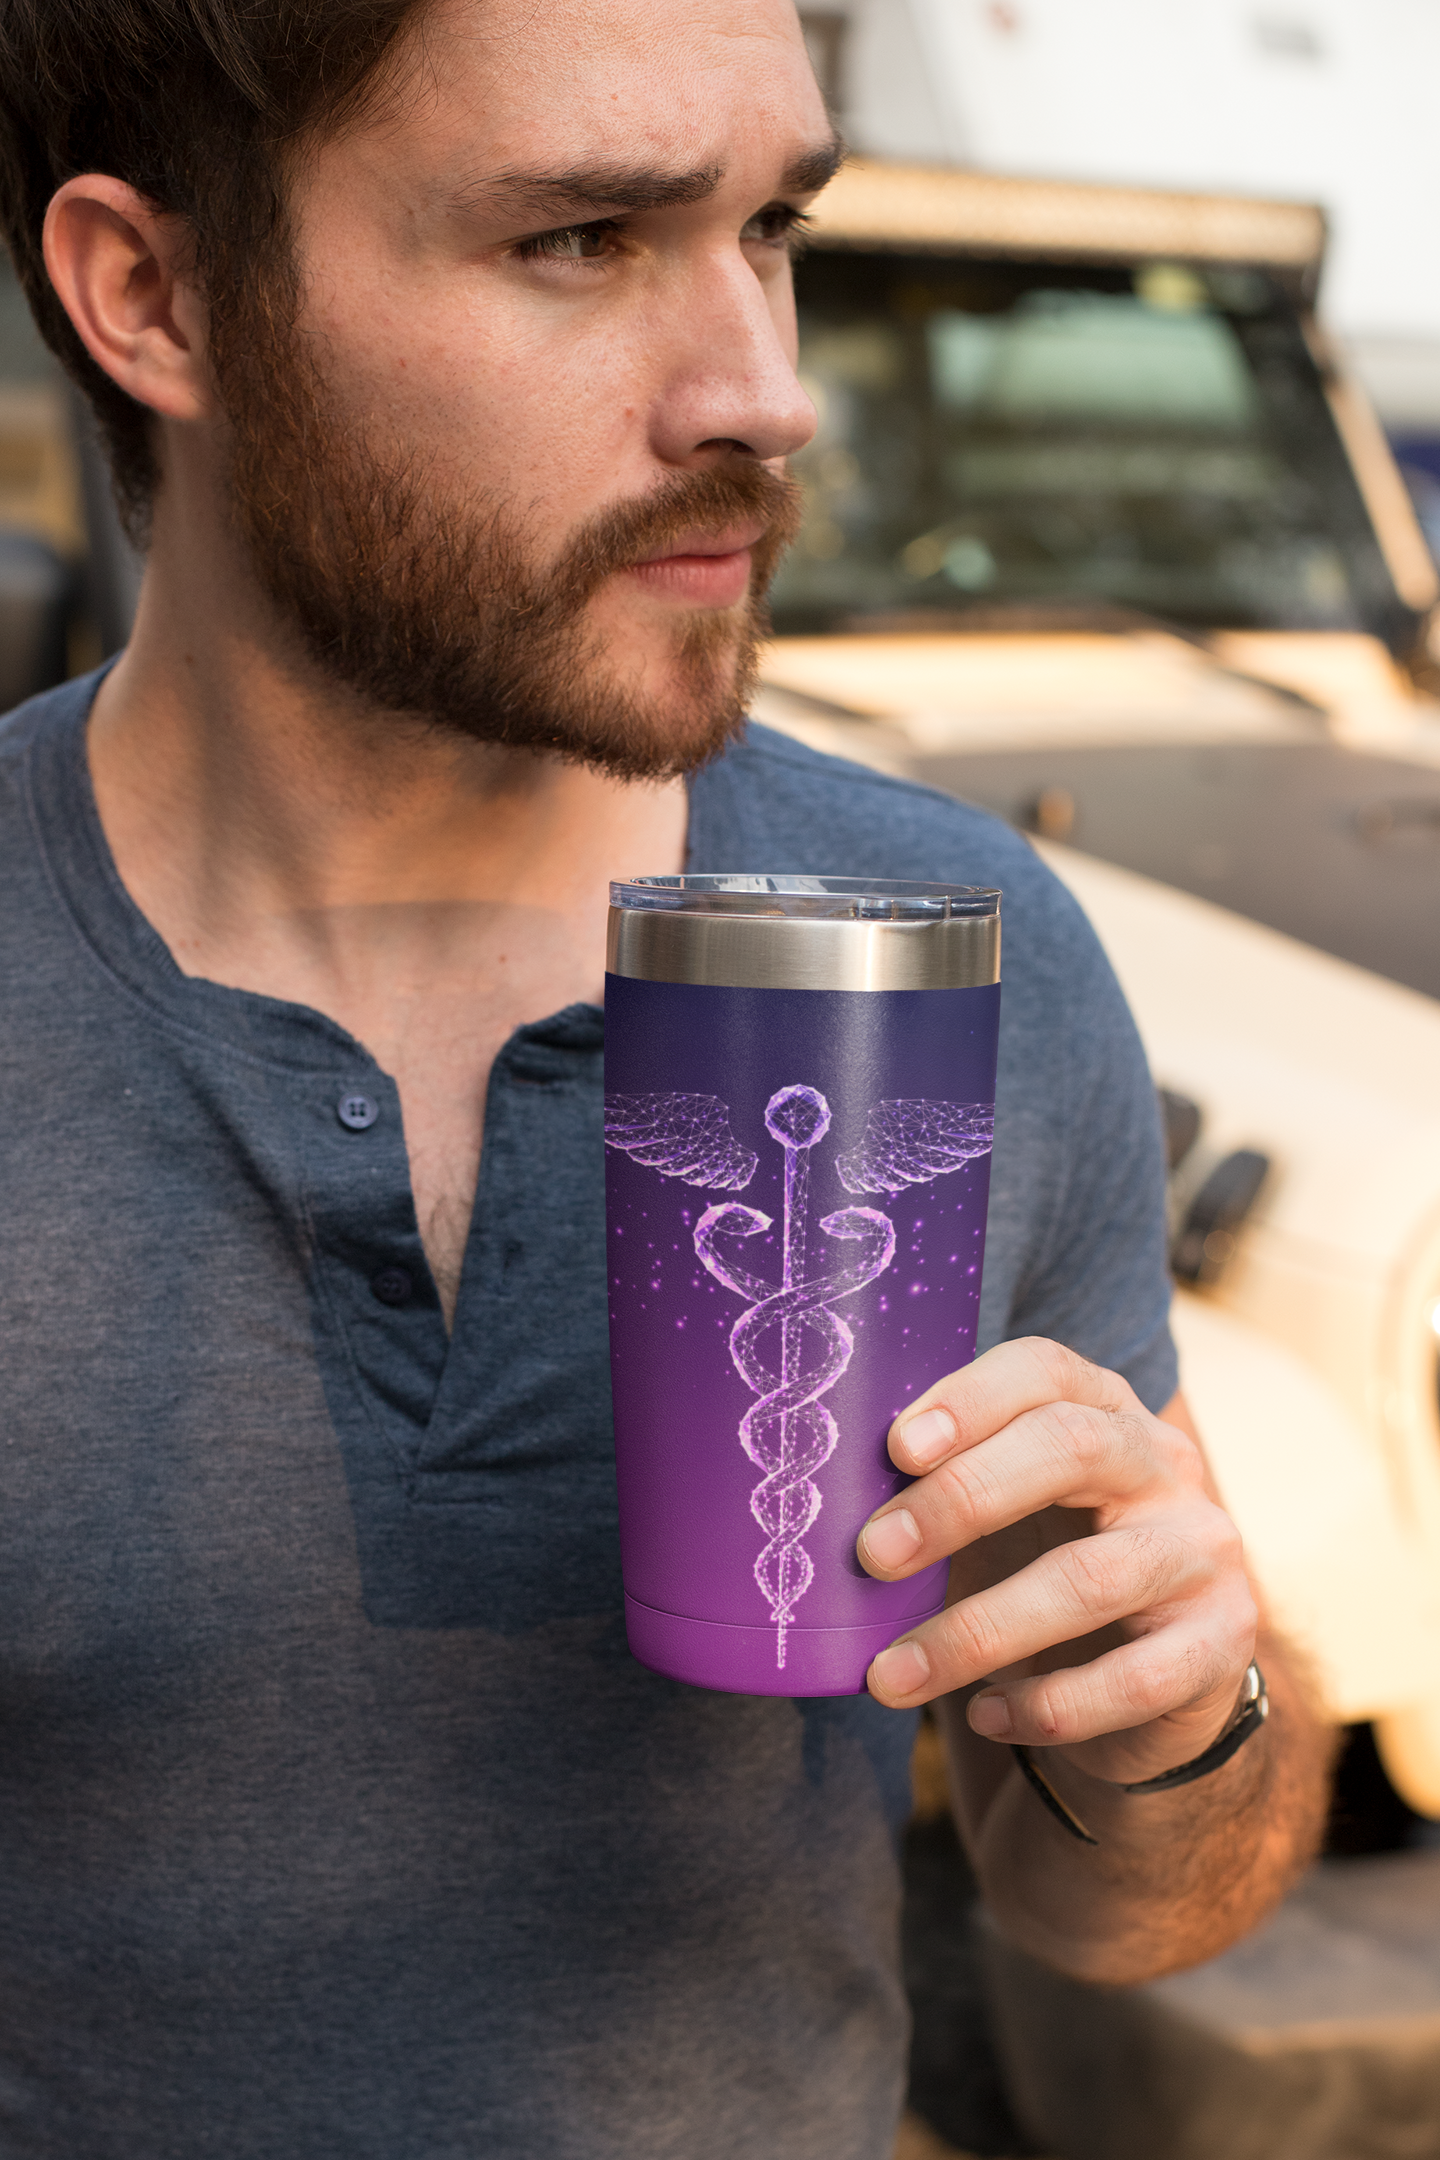 Elevate Your Hydration Game with the Caduceus Ambient Design Tumbler 20oz - Stay Refreshed in Style Gift for a Healthy Life of Fitness and Wellness